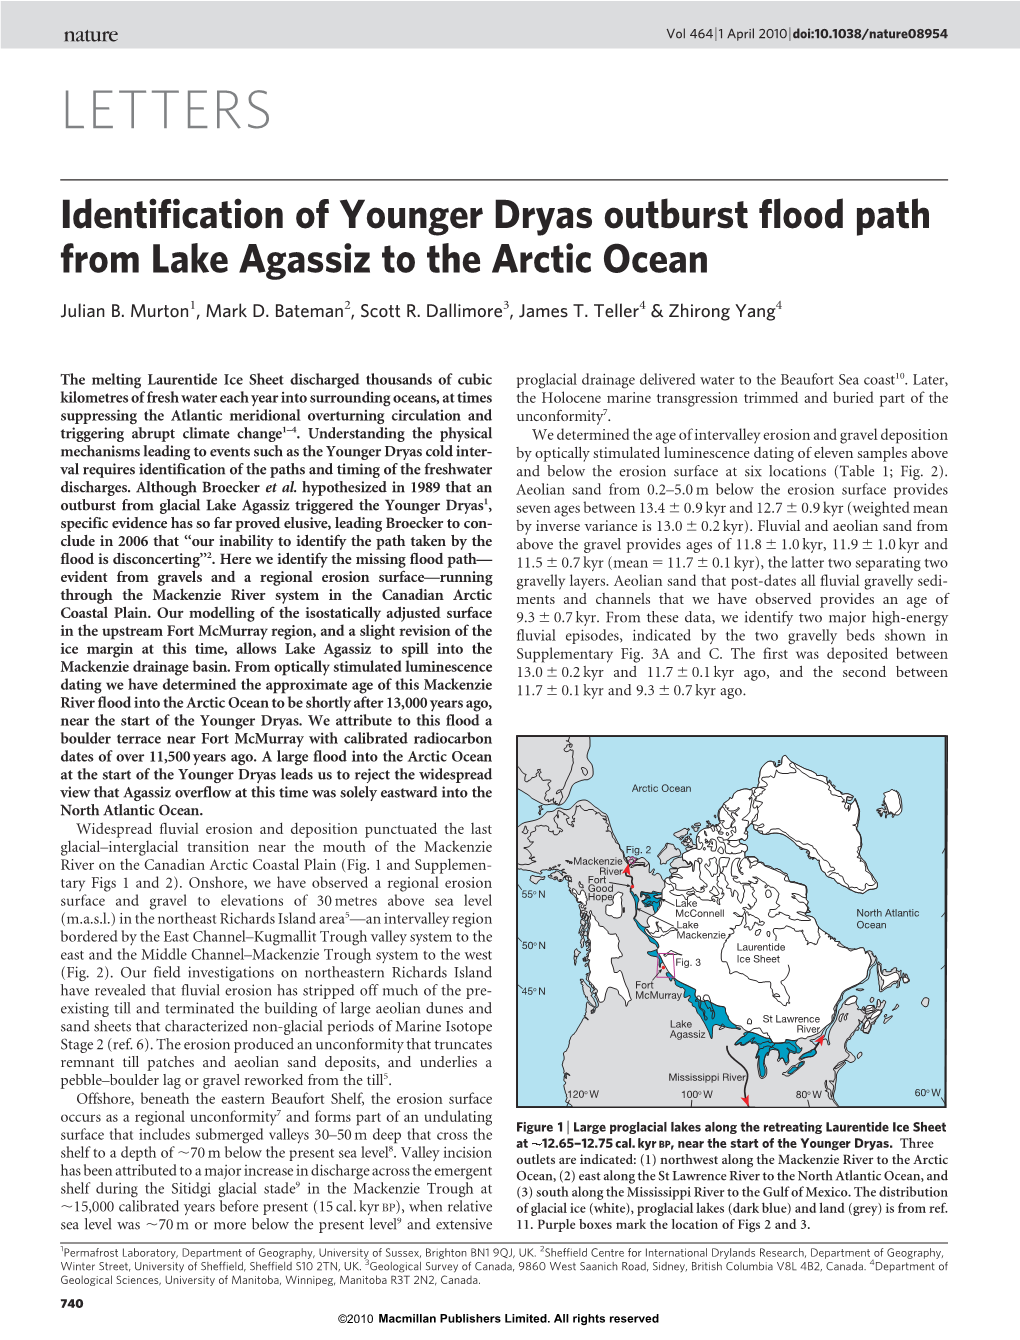 Identification of Younger Dryas Outburst Flood Path from Lake Agassiz to the Arctic Ocean